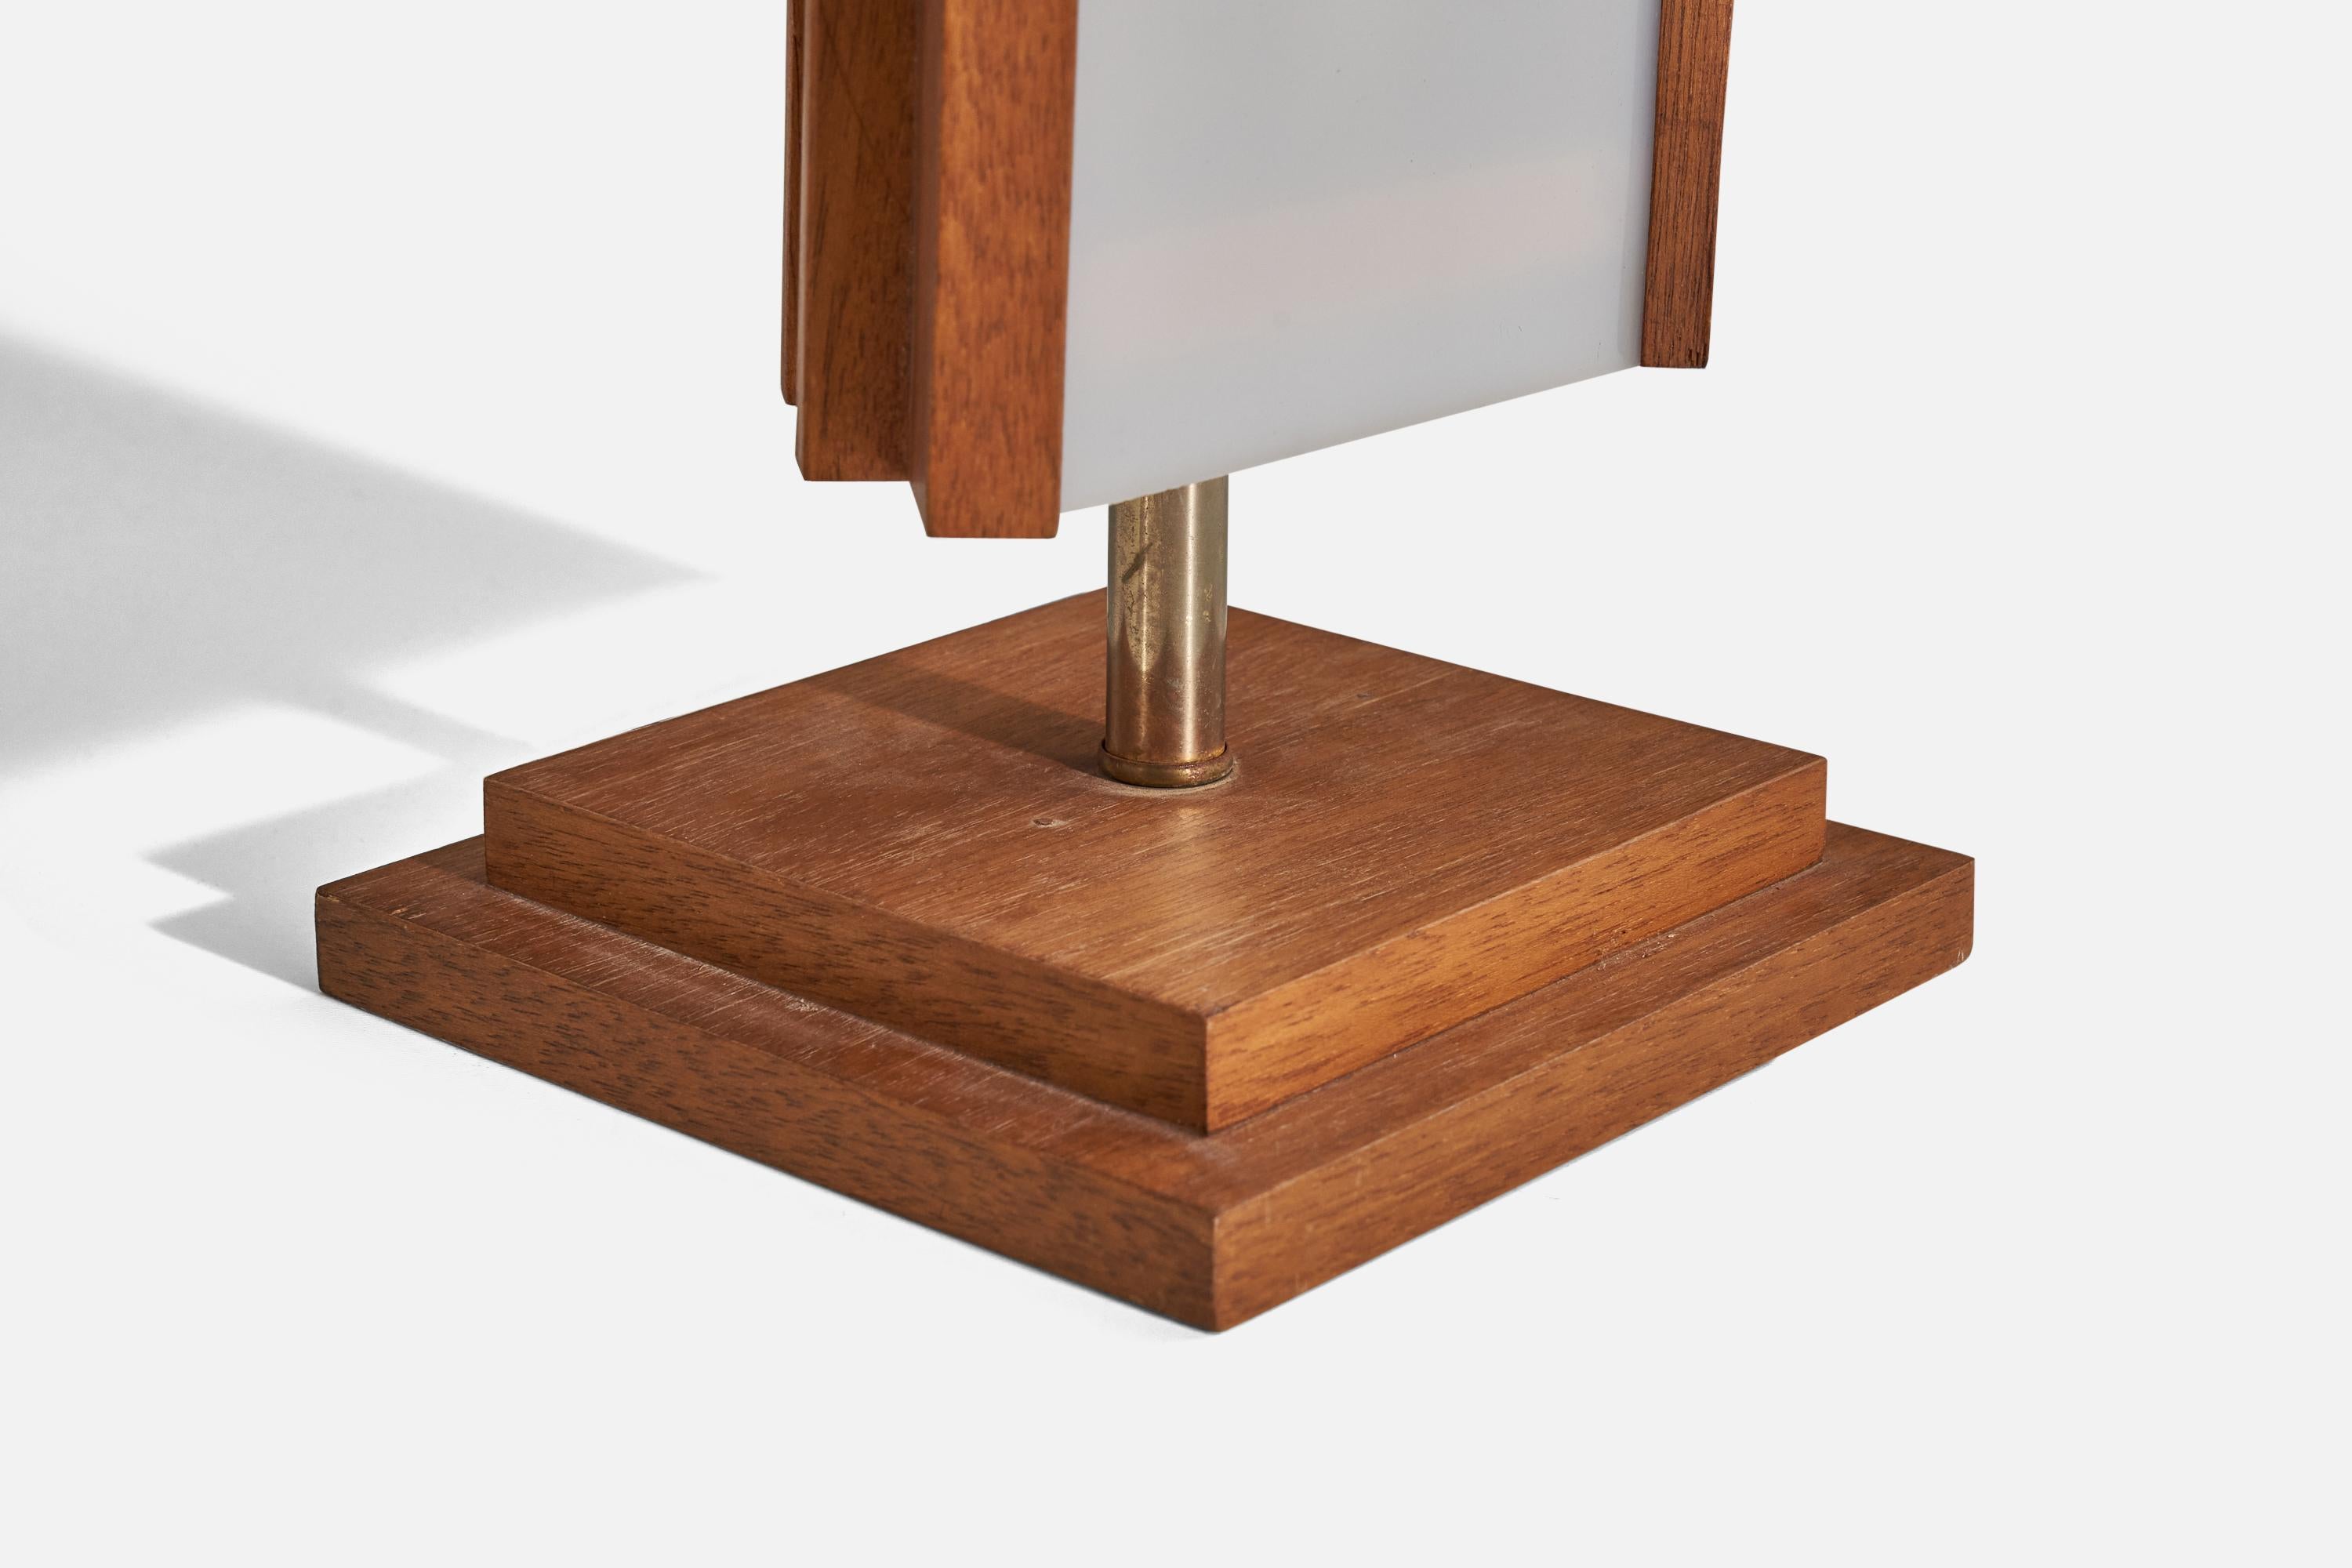 Mid-20th Century American Designer, Table Lamp, Acrylic, Oak, United States, c. 1960s For Sale